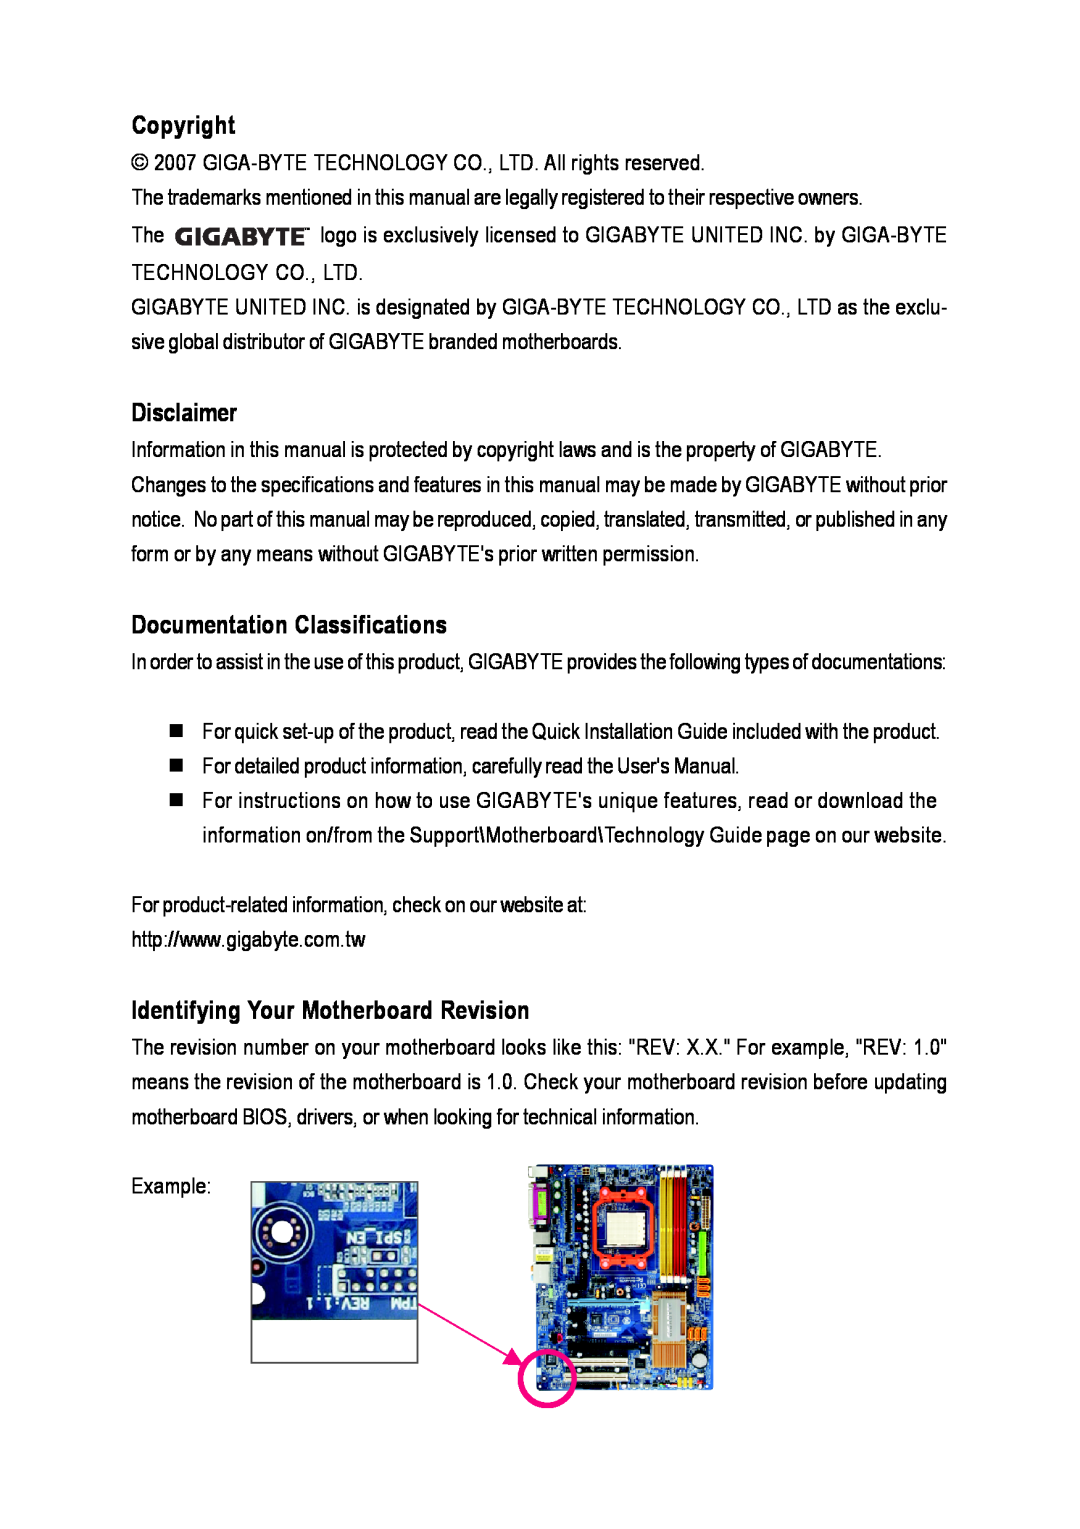 Gigabyte GA-M52S-S3P Copyright, Disclaimer, Documentation Classifications, Identifying Your Motherboard Revision, Example 